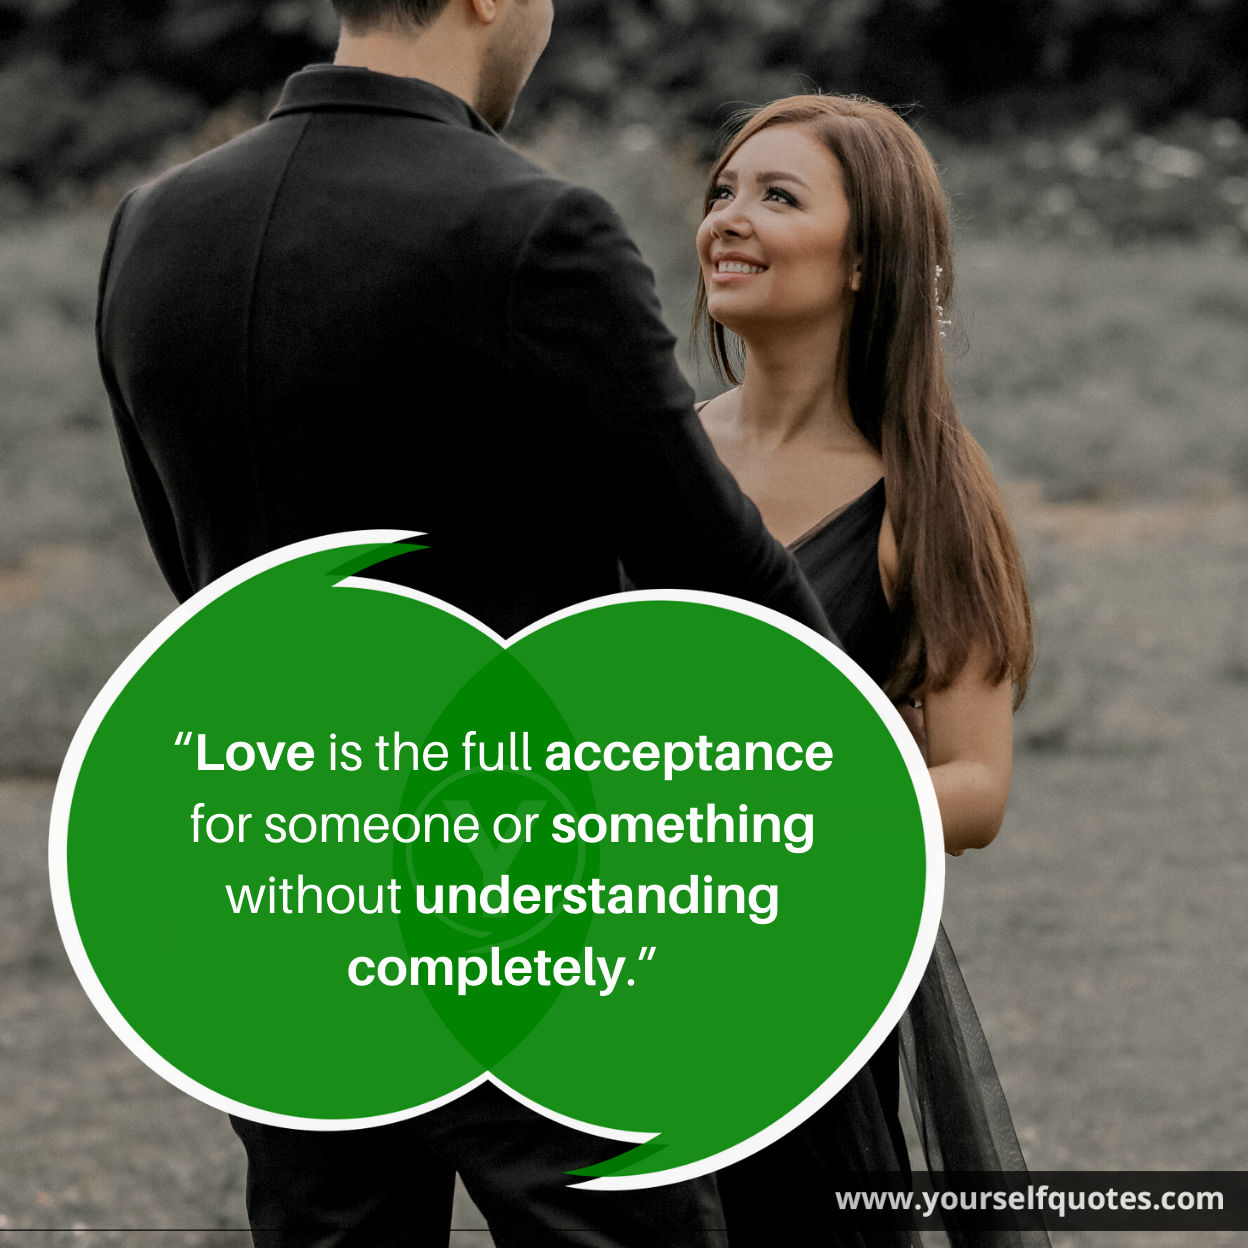 Famous Quotes on Love